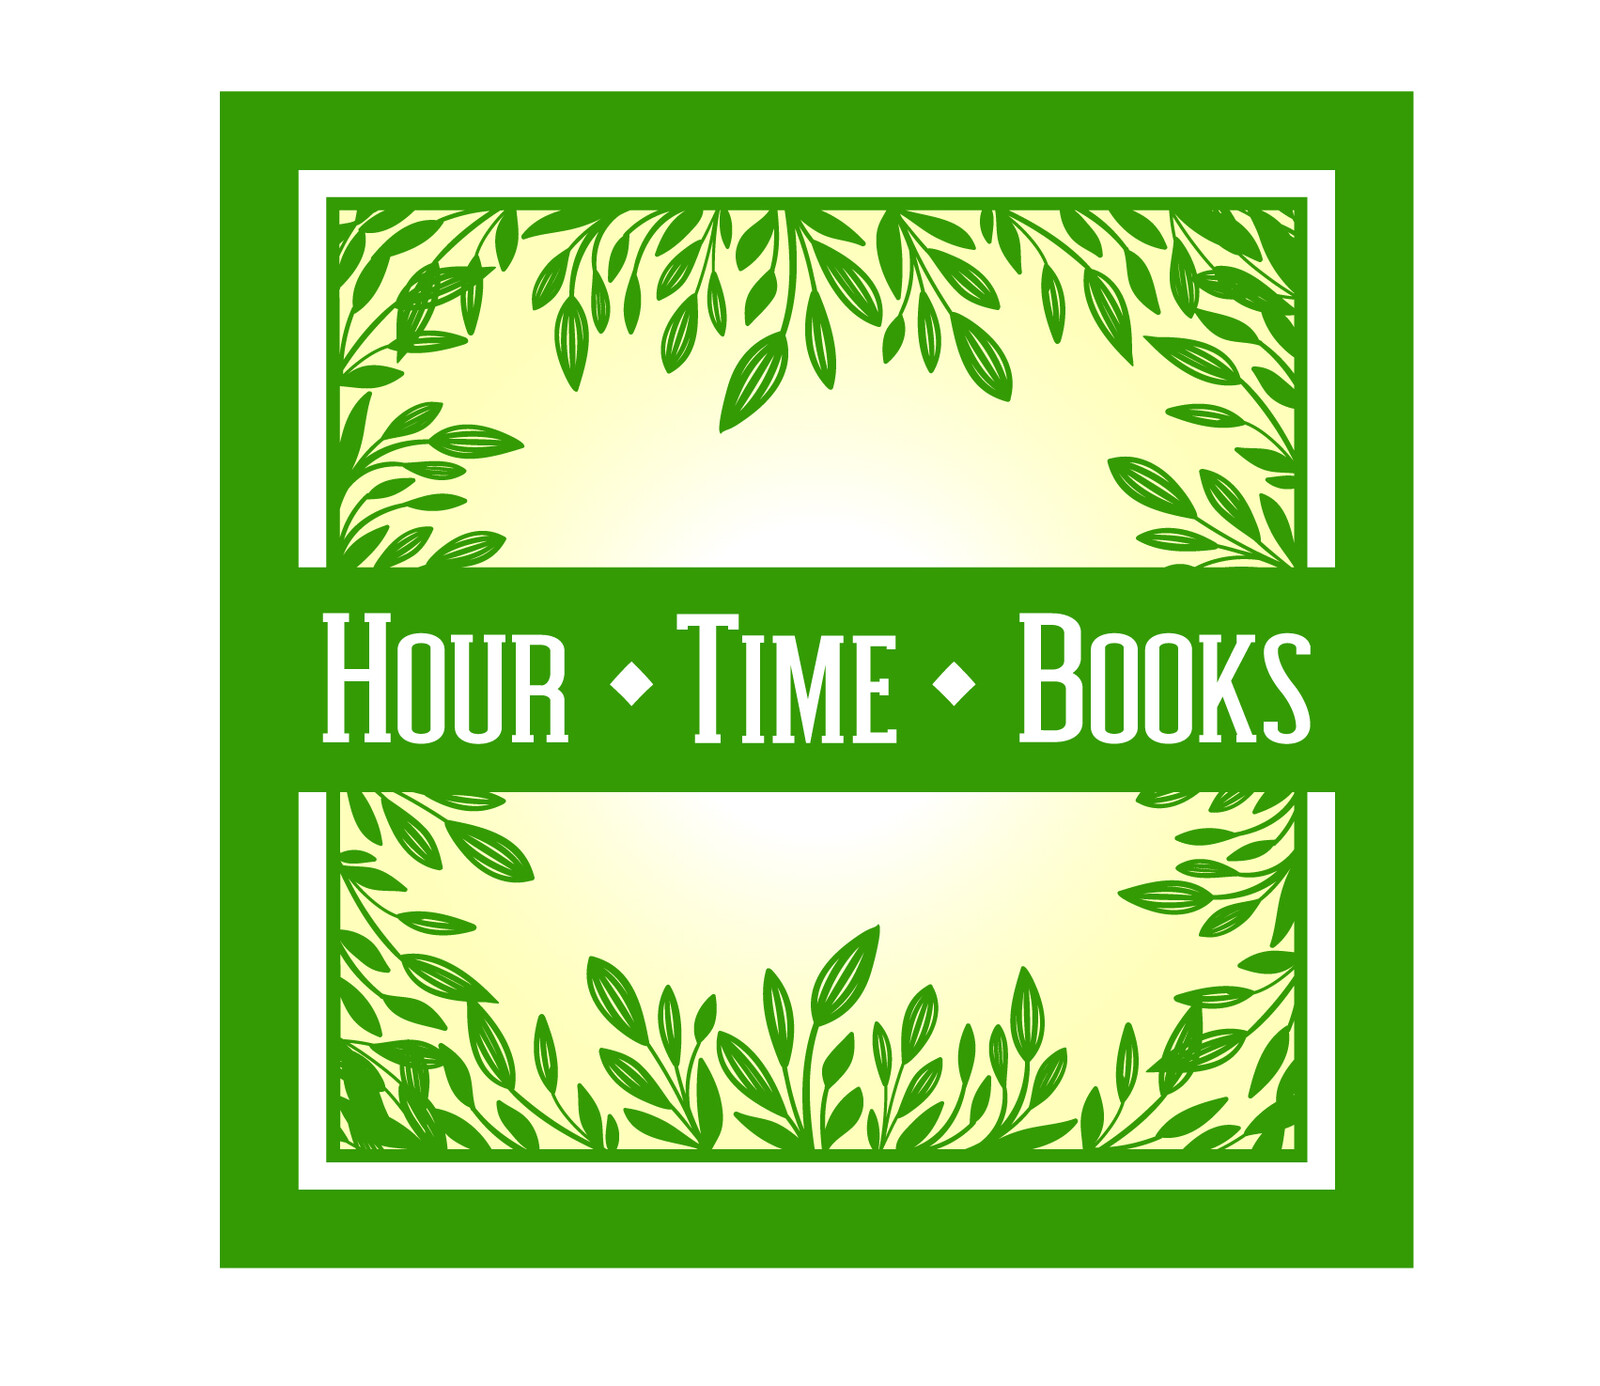 Commercial business logo design for Hour Time Books, a subsidiary of Eschar Publications.